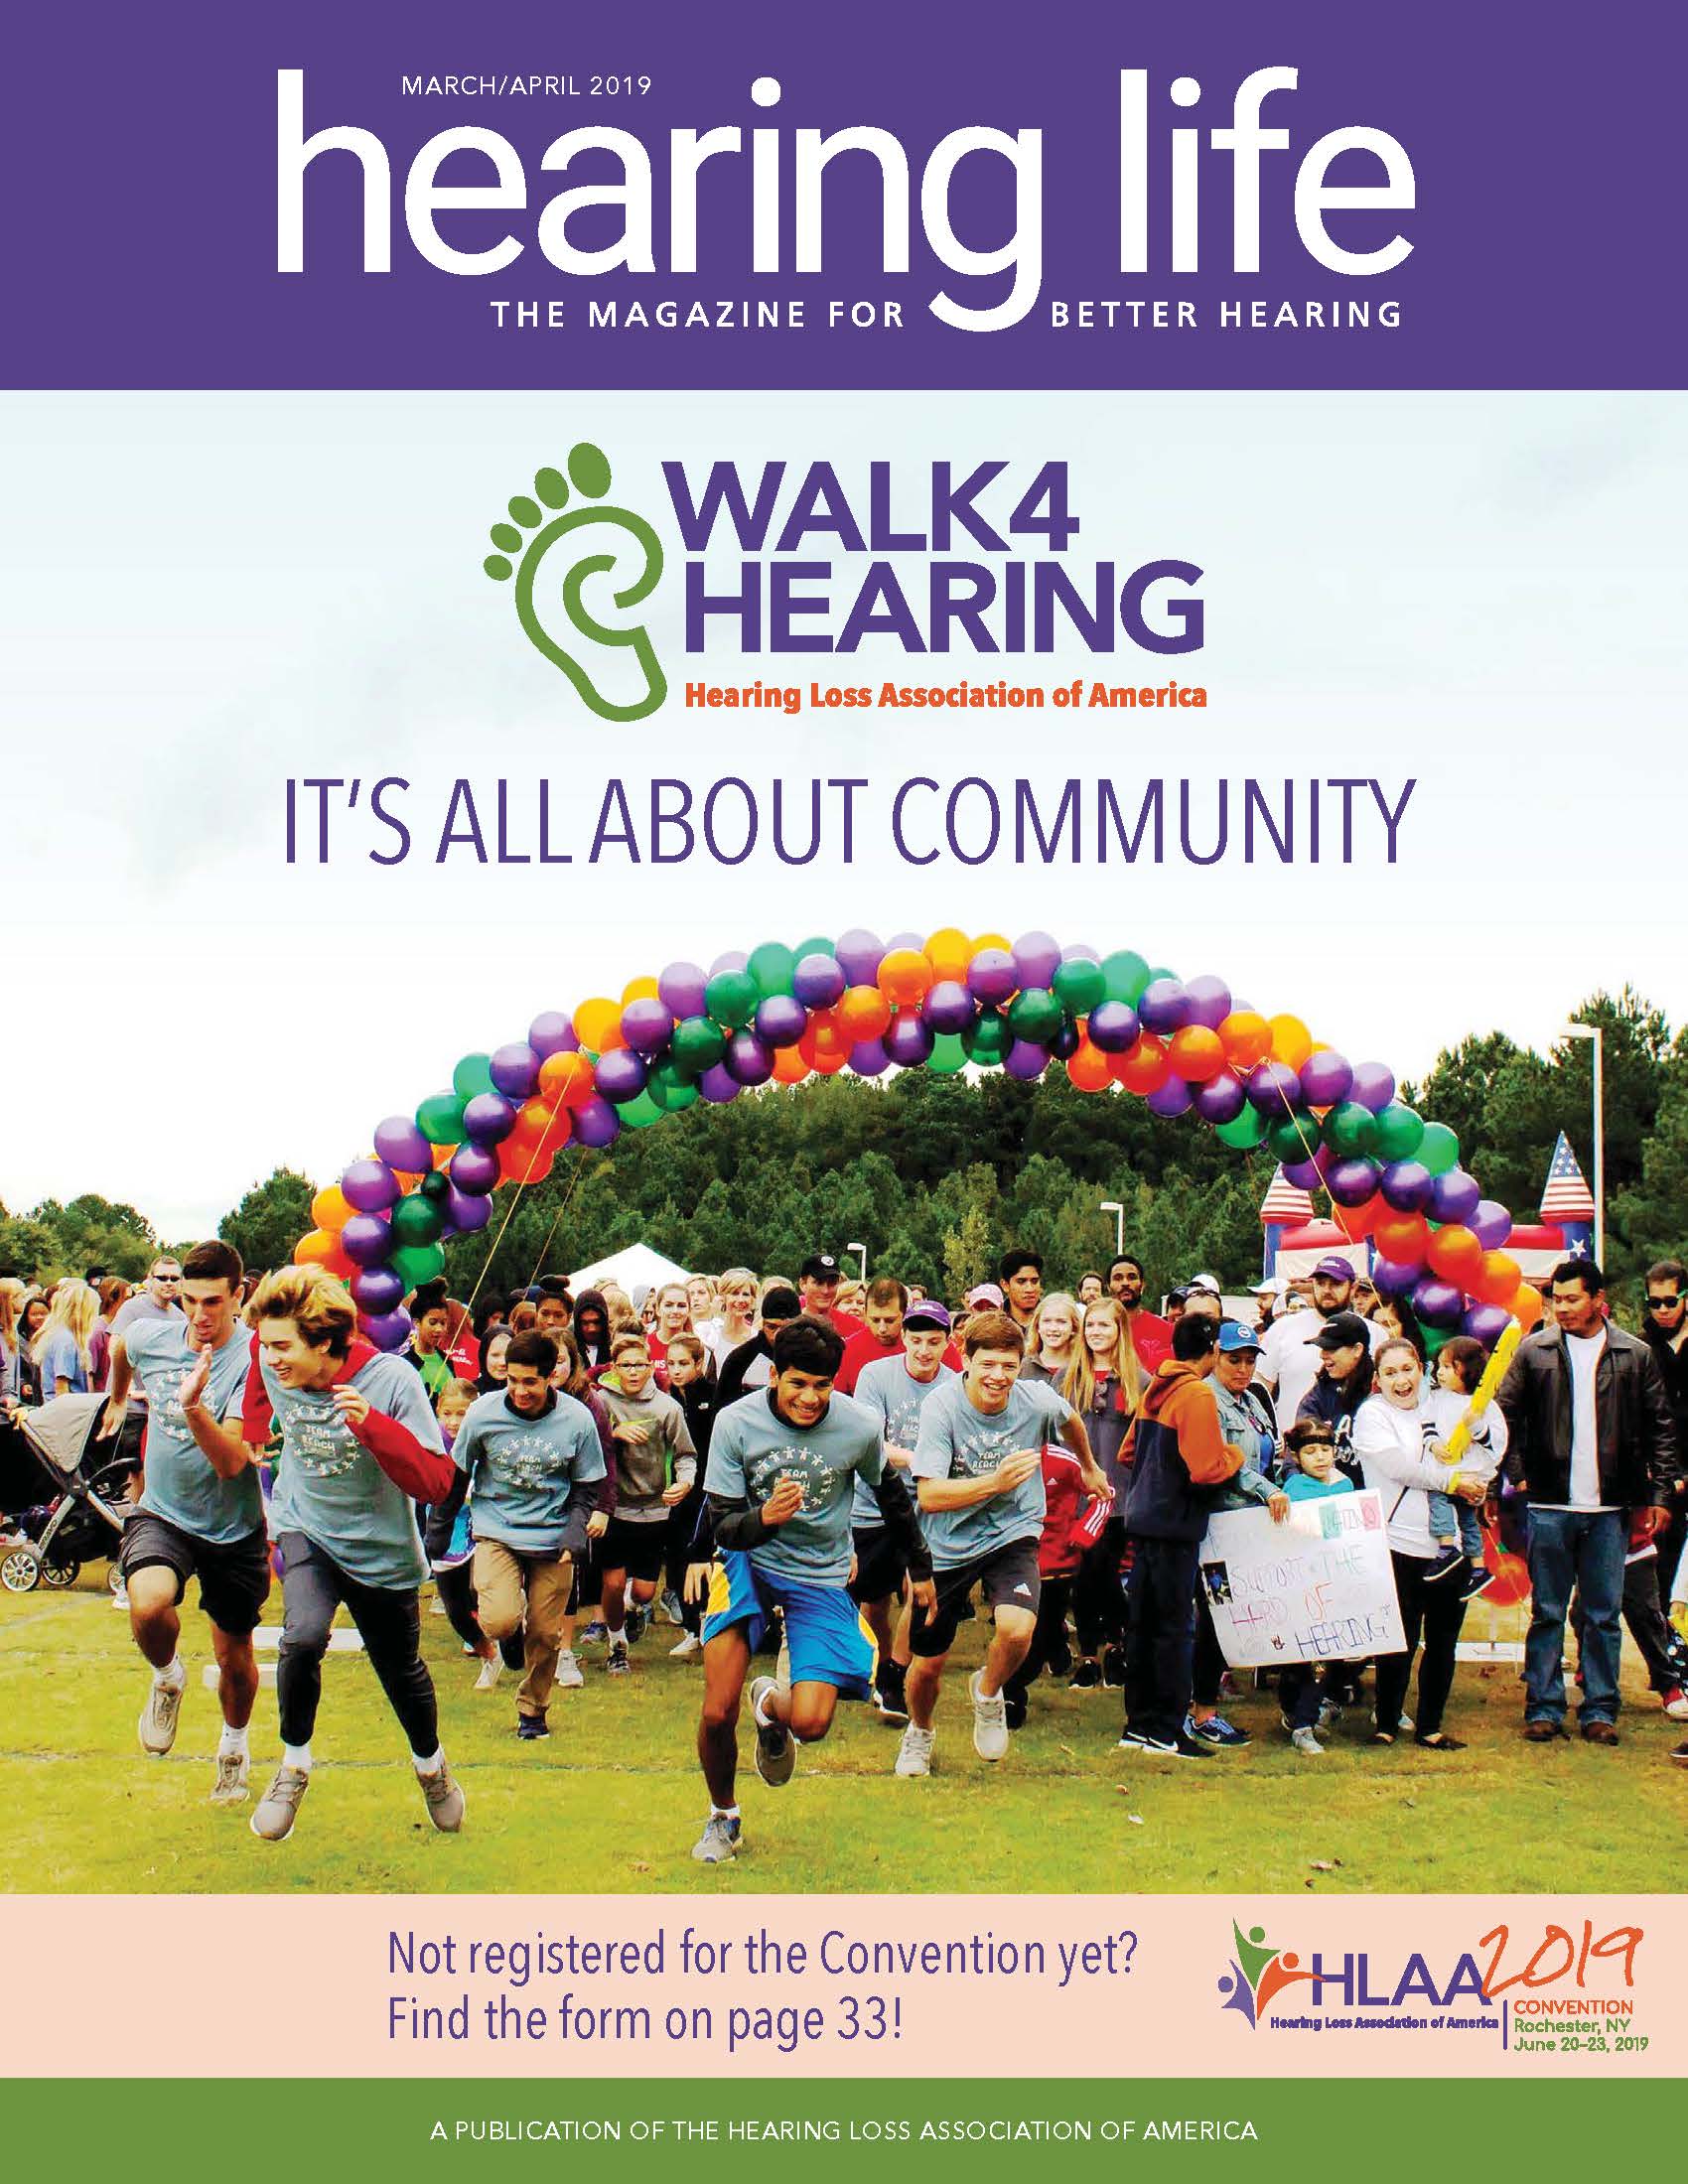 HLAA HearingLife 2019 March/April Cover